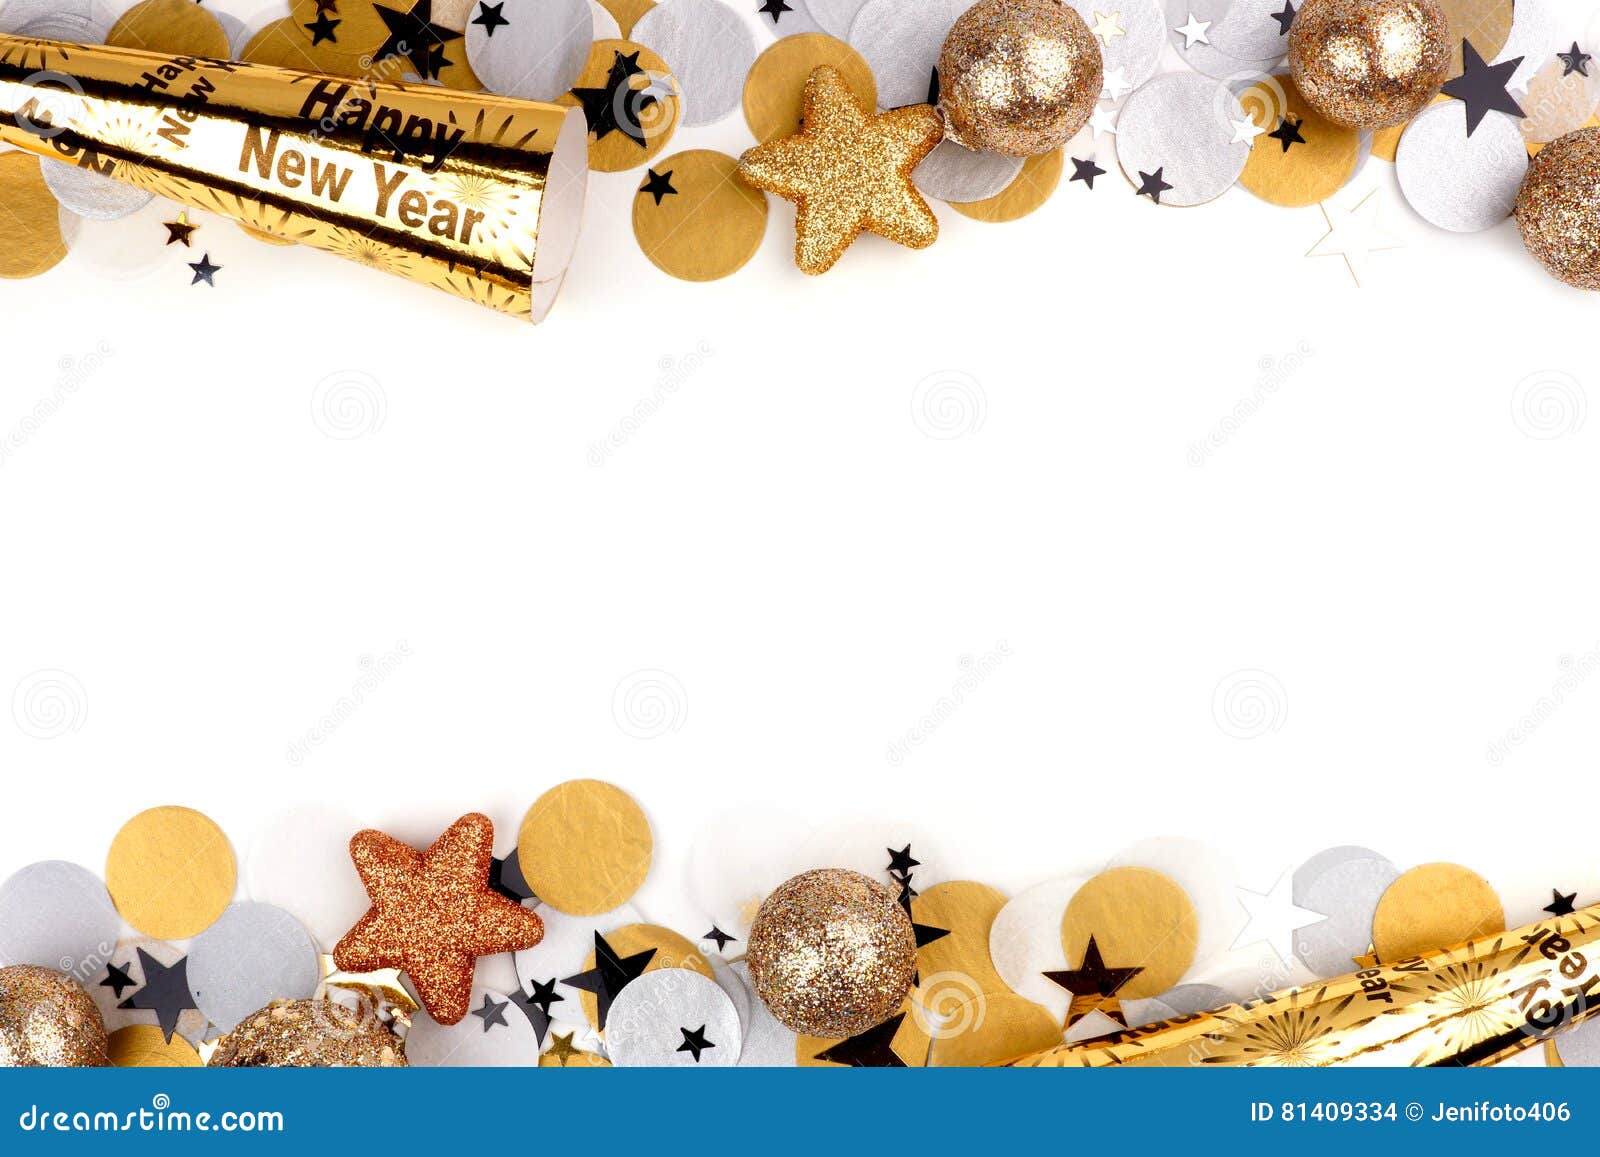 new years eve double border of confetti and decor over white